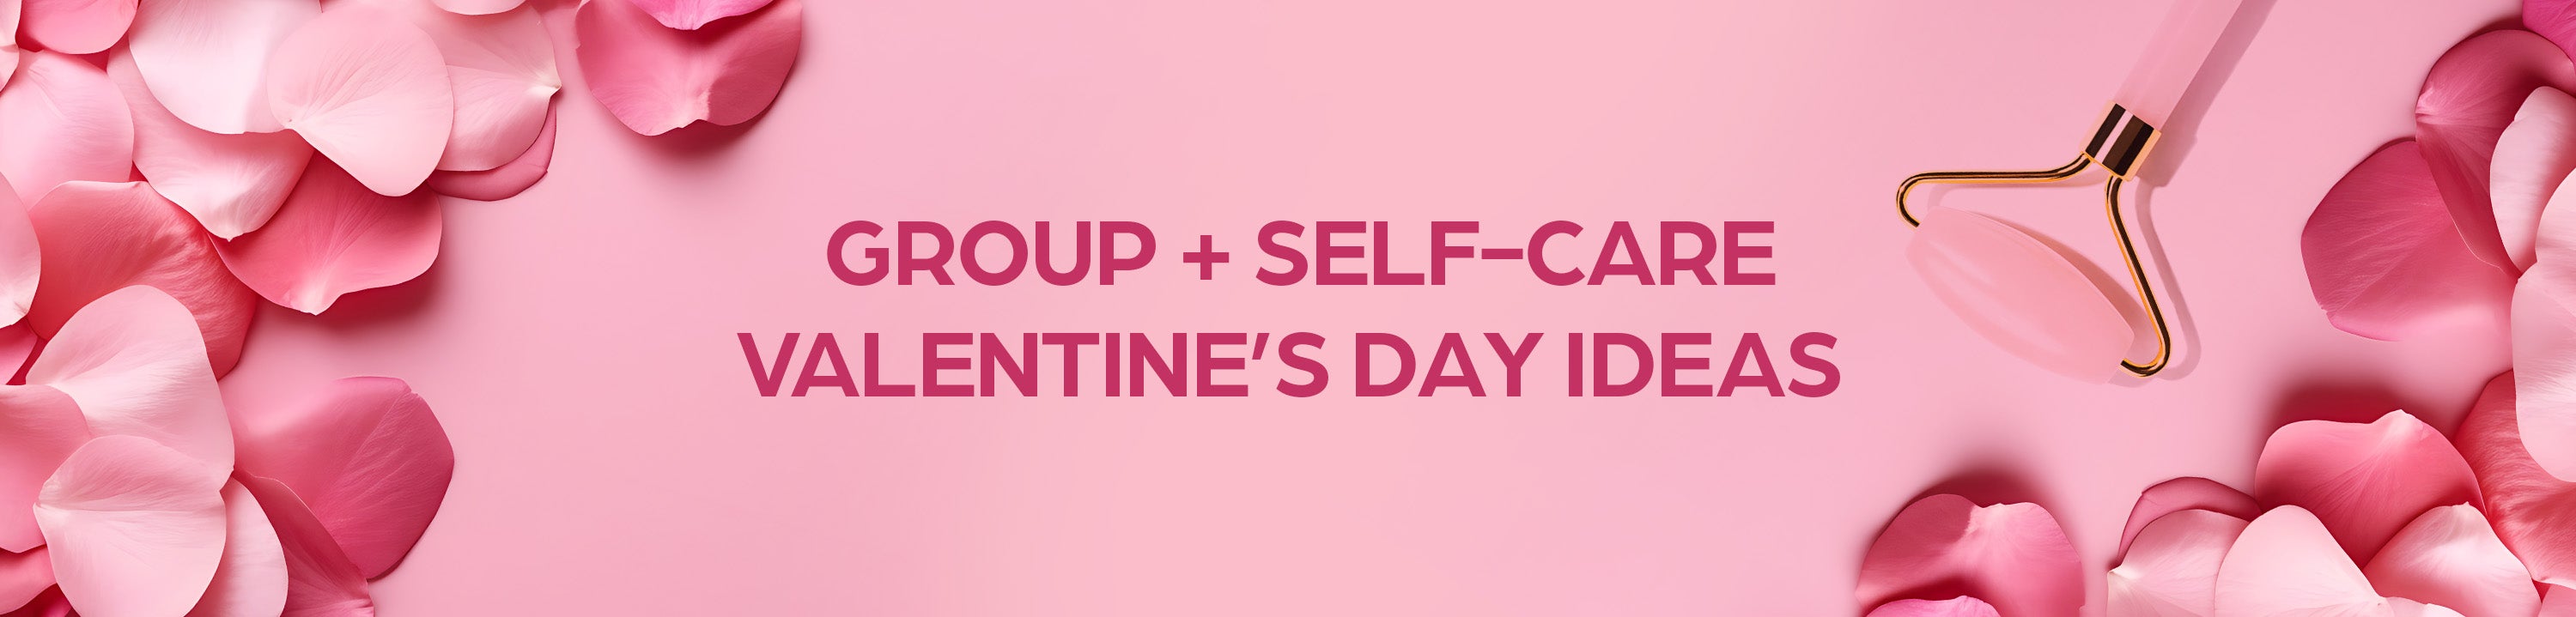 Self-care and Galentine's Day Ideas